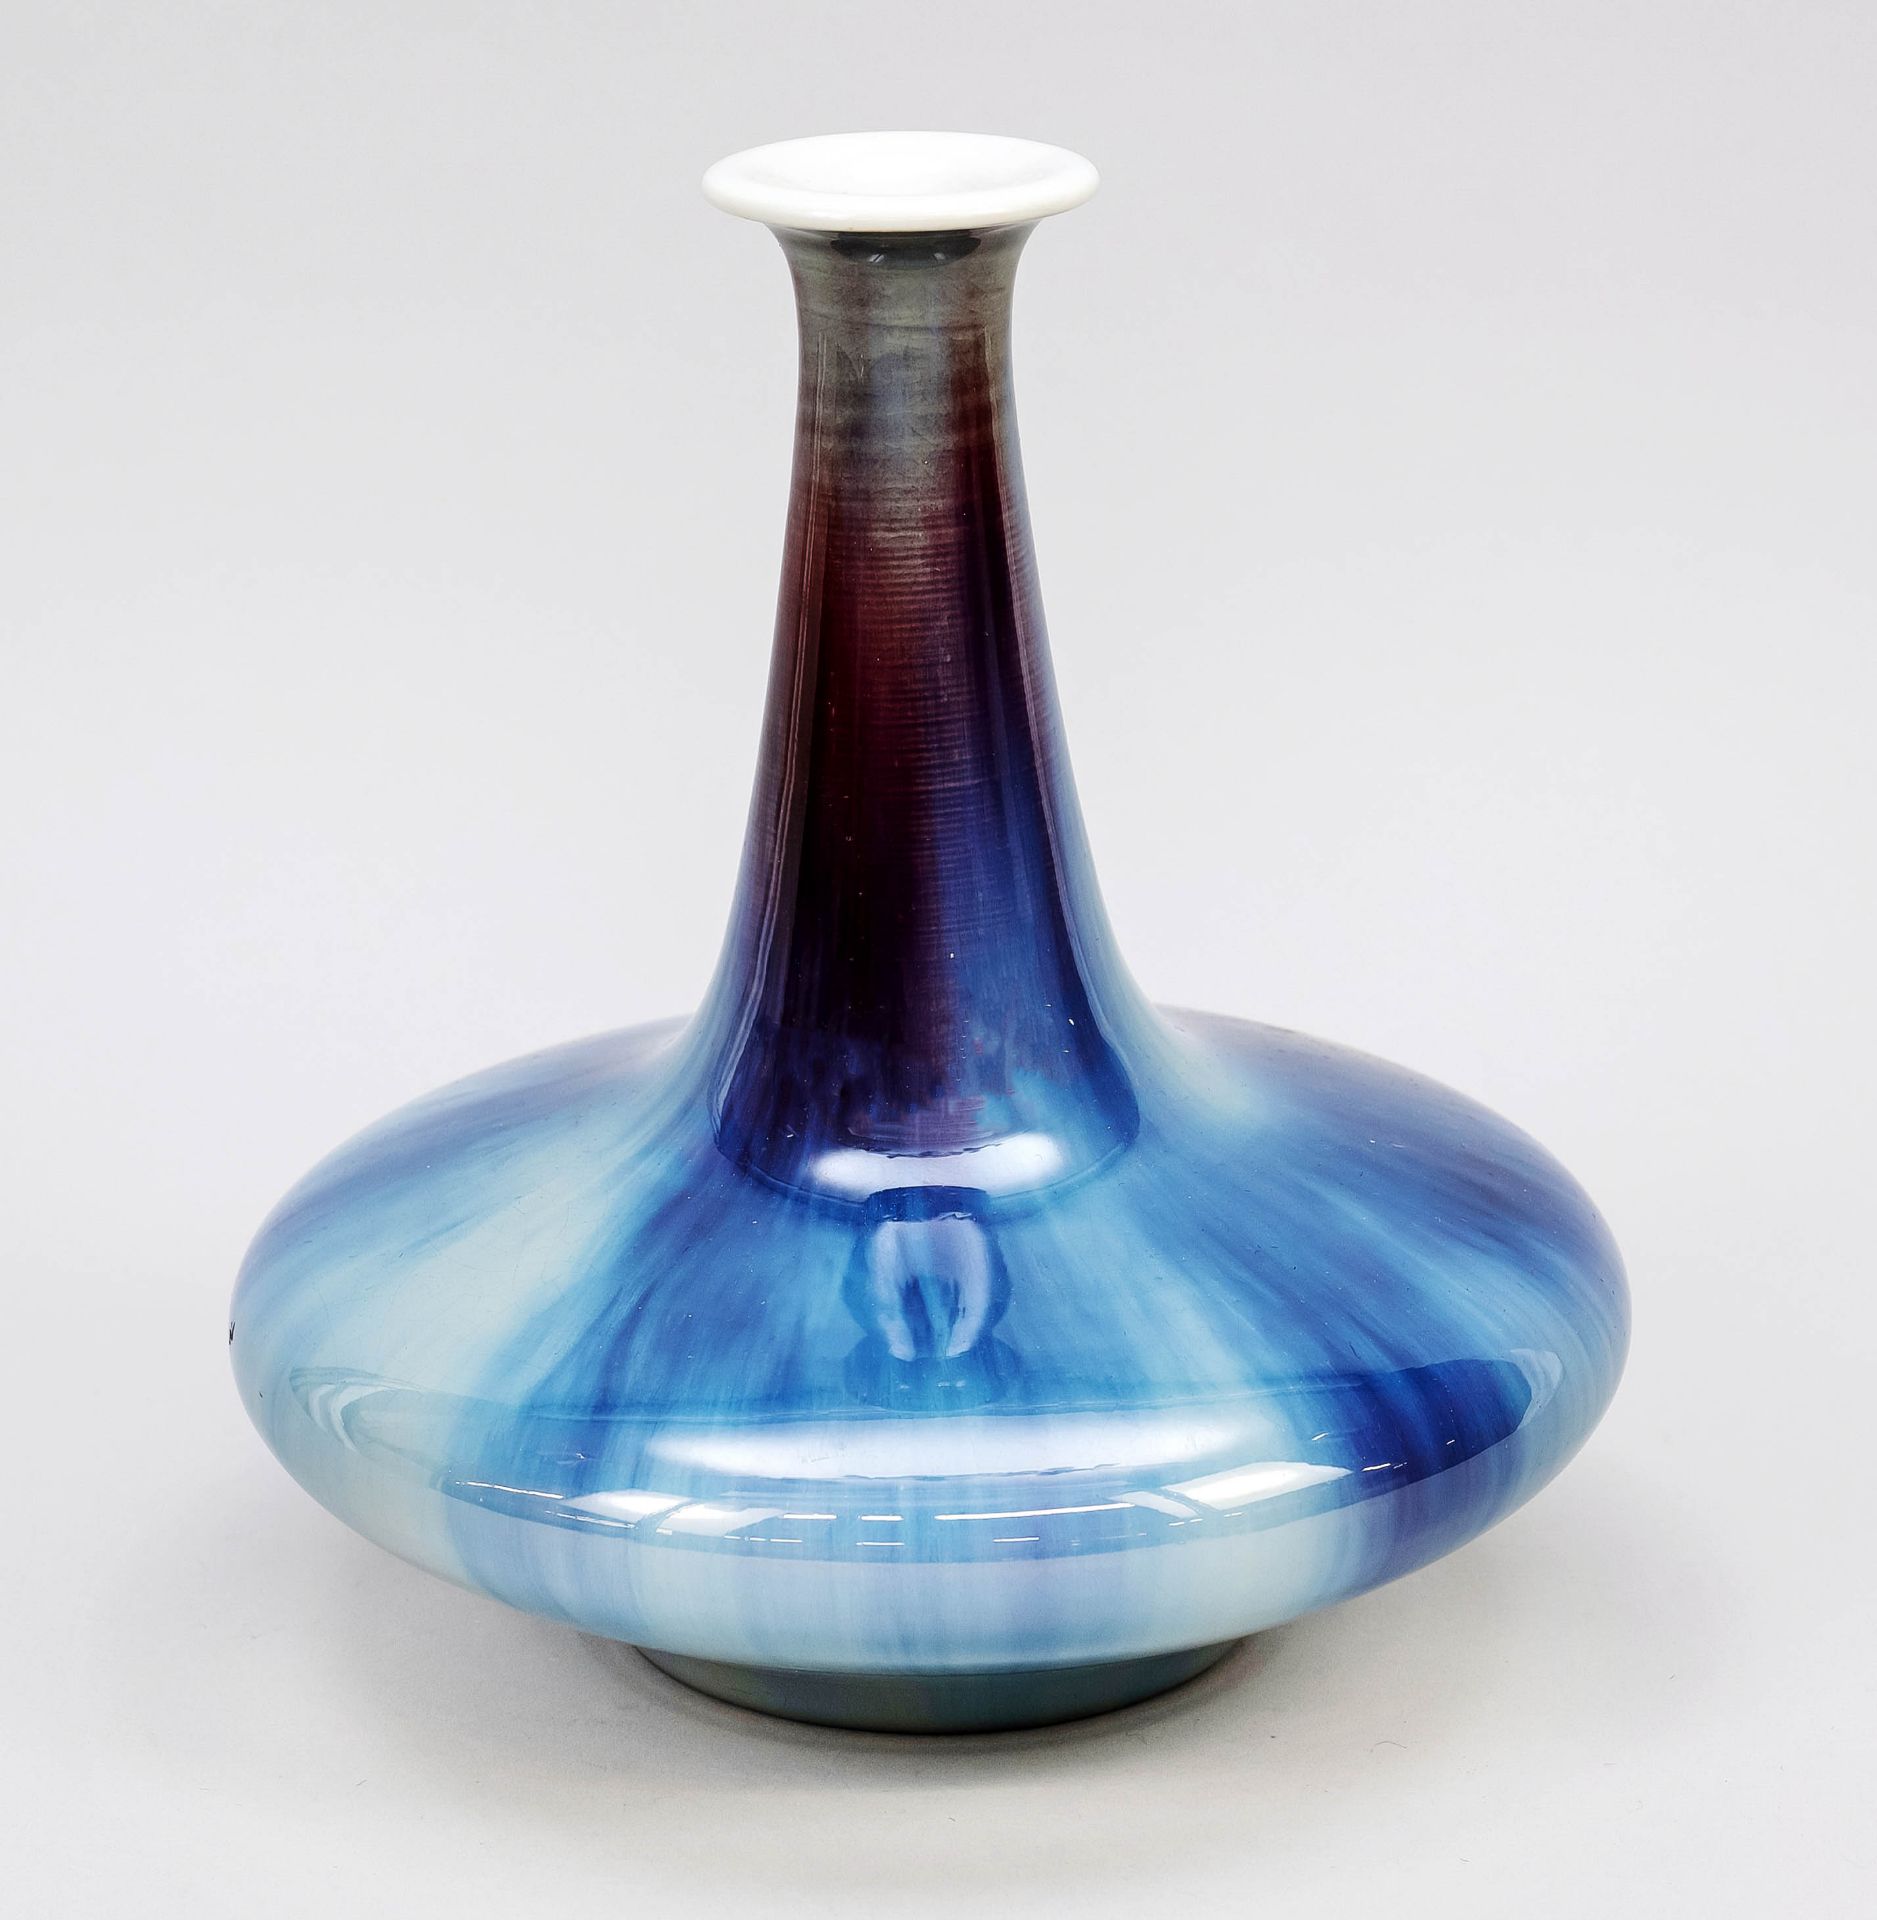 Junyao flat-bellied vase, China, probably Republican period (1912-1949), porcelain bottle with